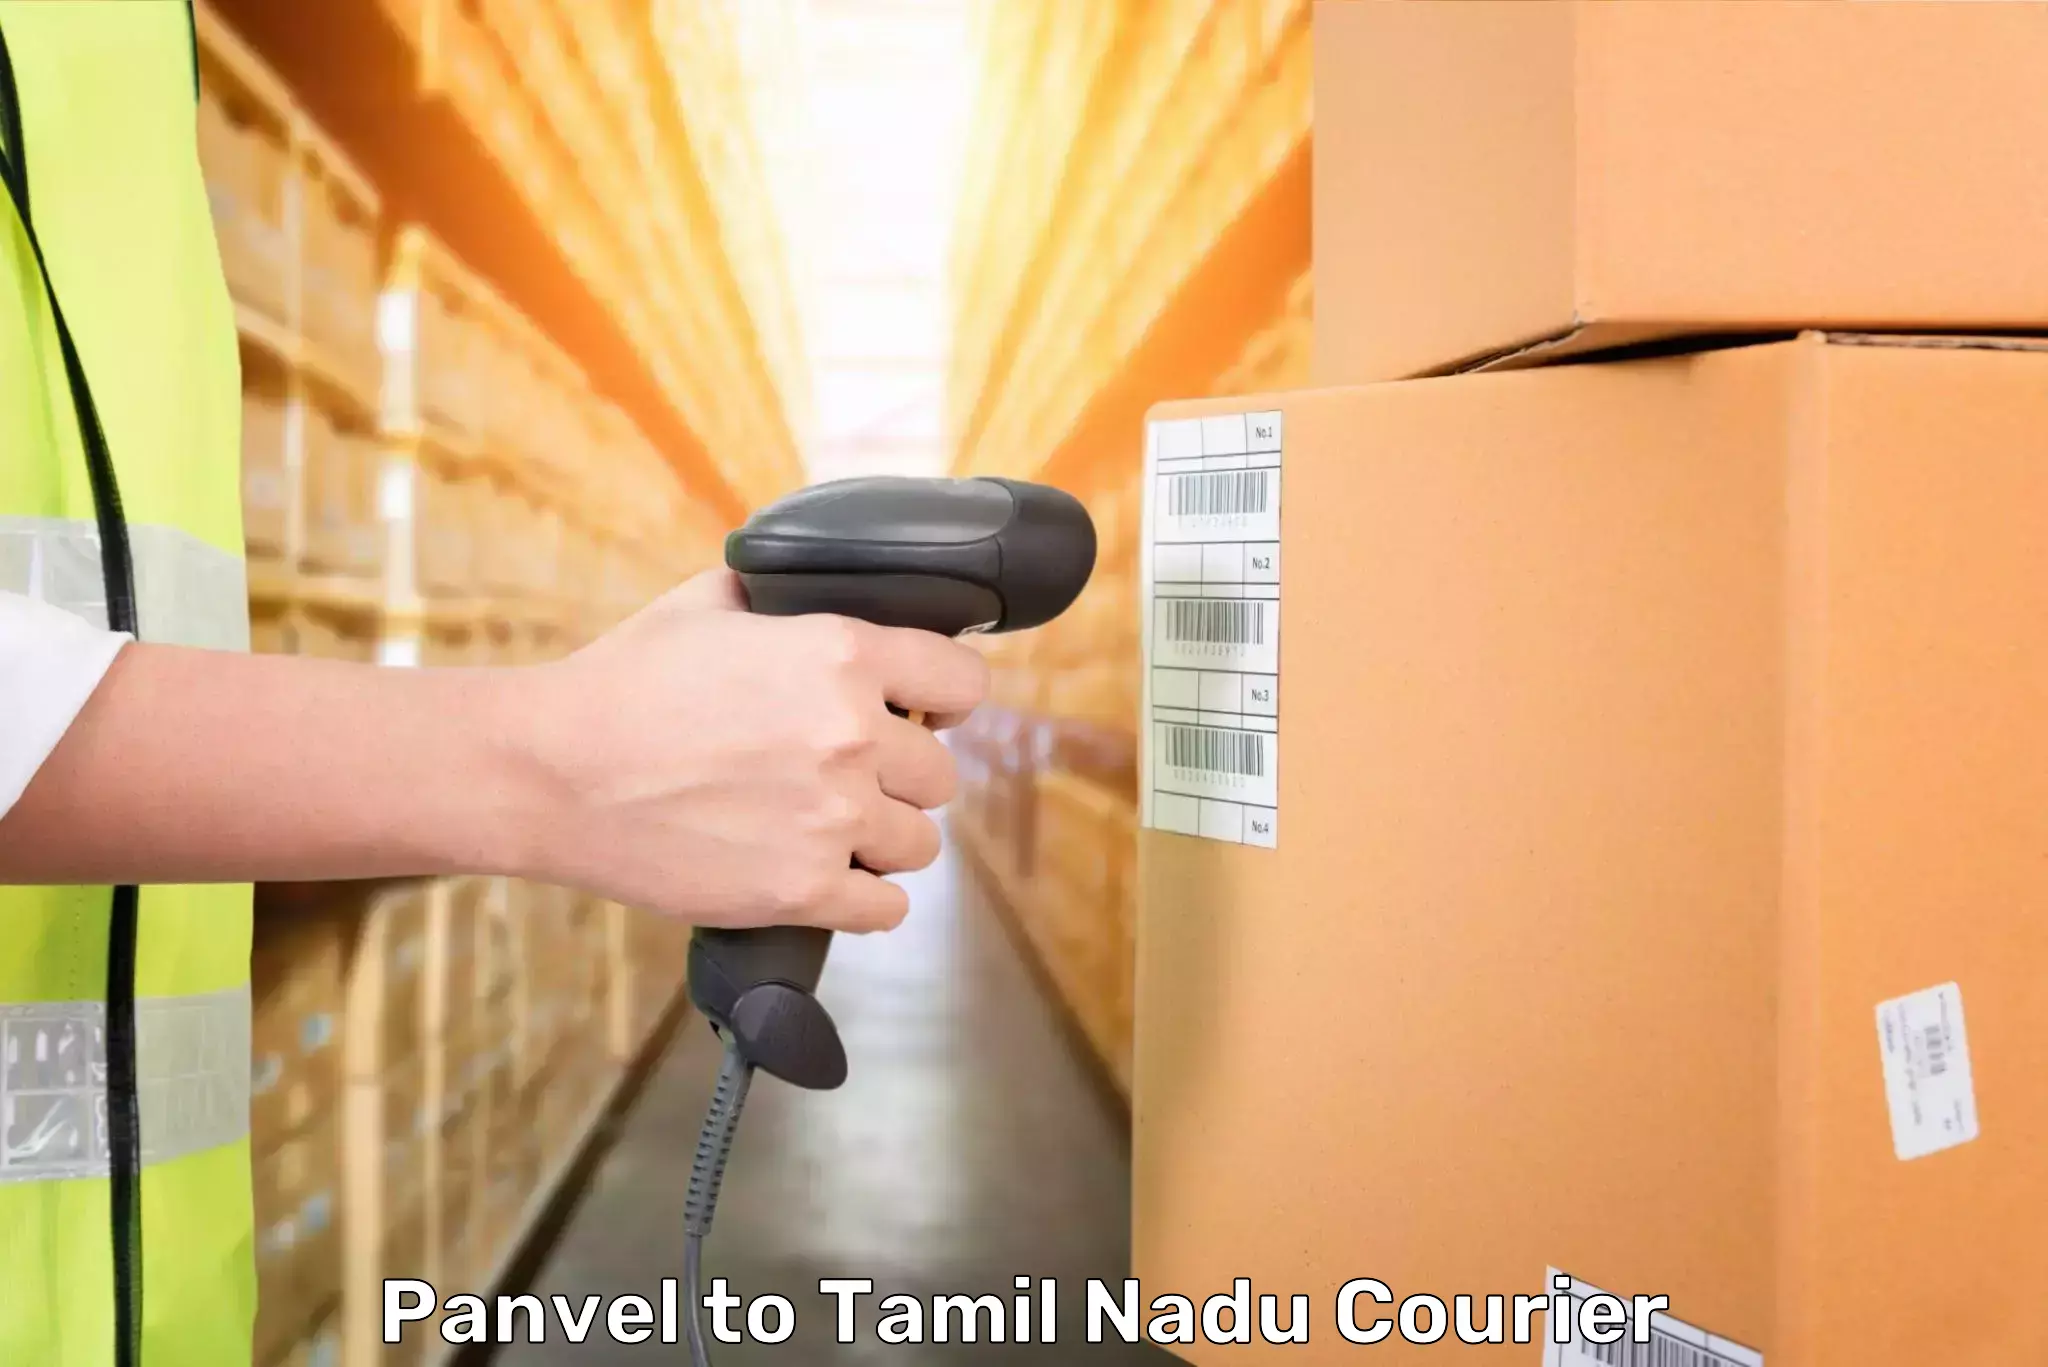 Luggage delivery app Panvel to Chennai Port